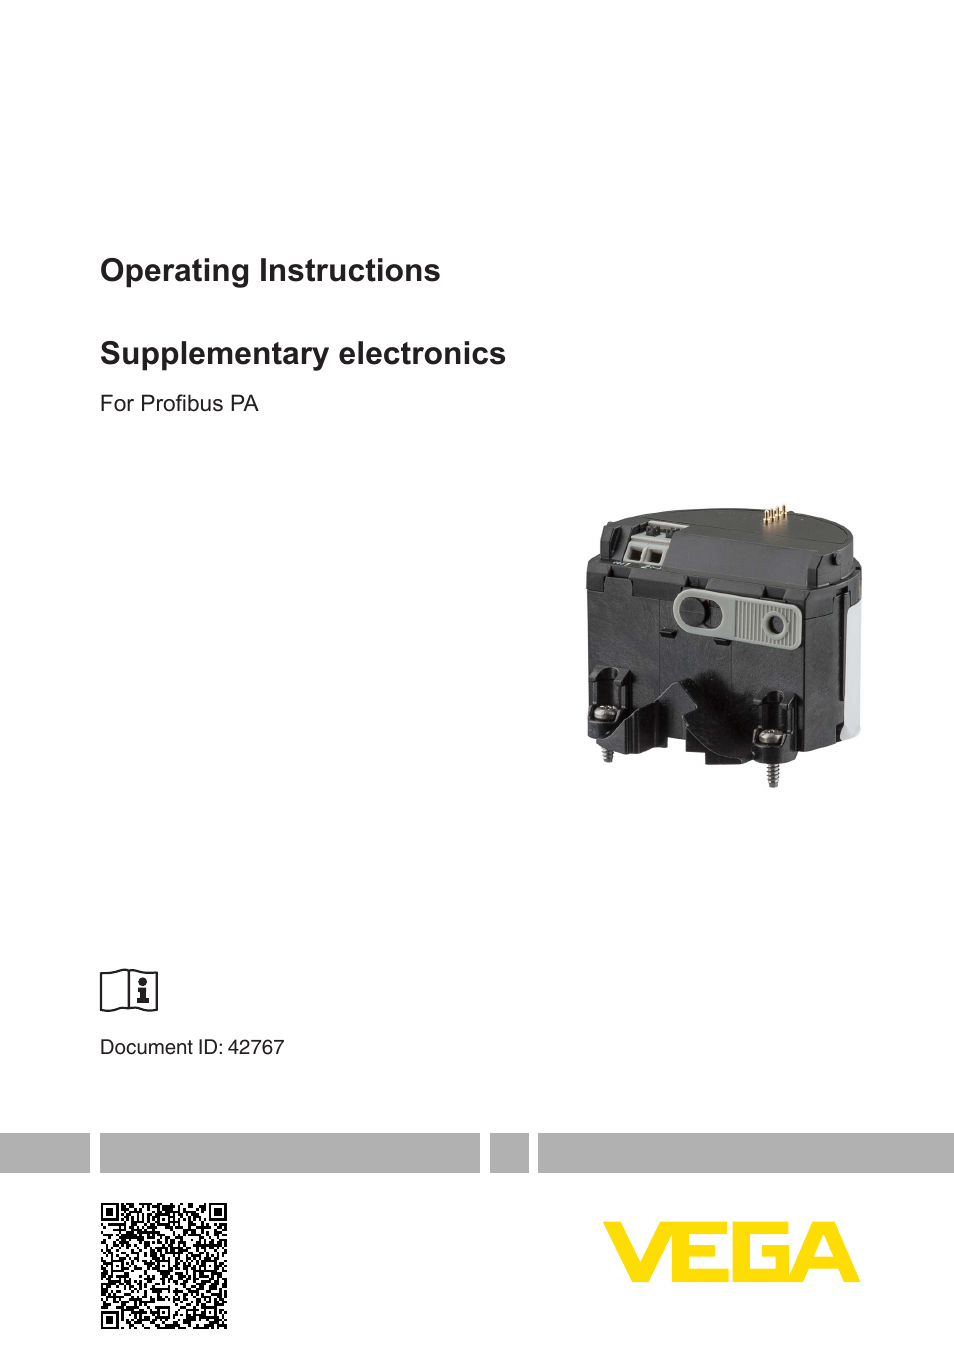 Supplementary electronics For Profibus PA